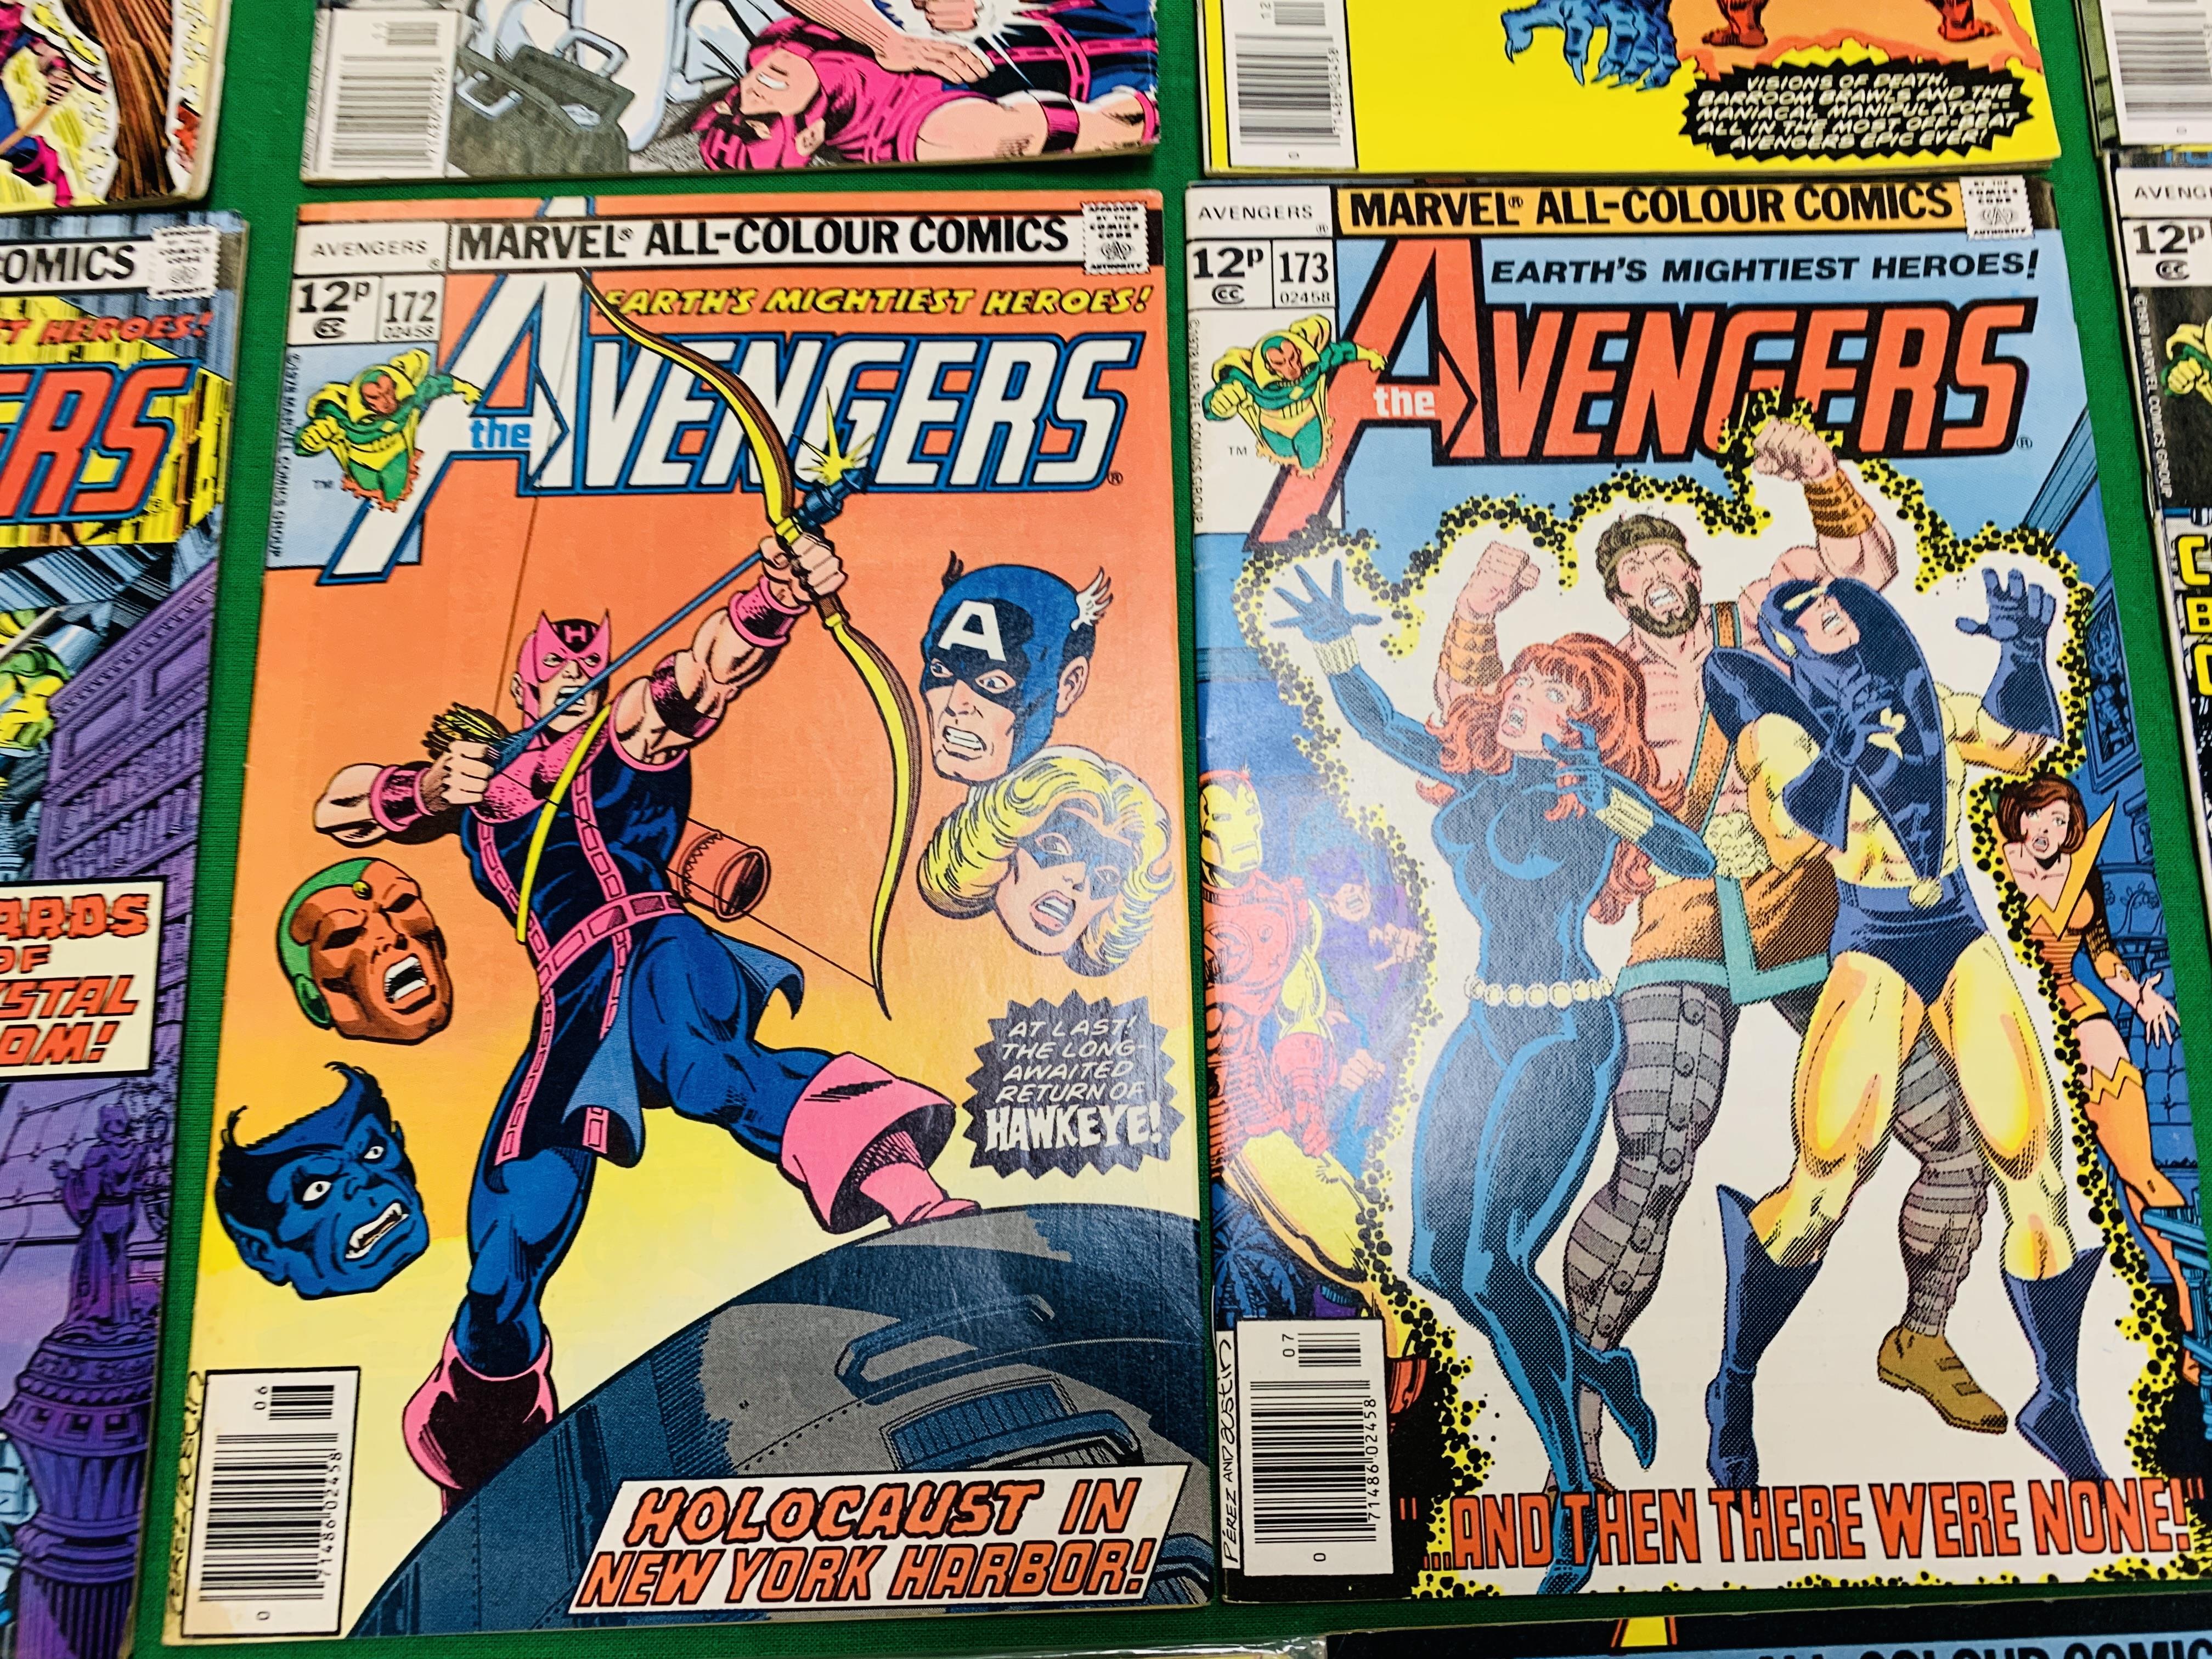 MARVEL COMICS THE AVENGERS NO. 101 - 299, MISSING ISSUES 103 AND 110. - Image 51 of 130